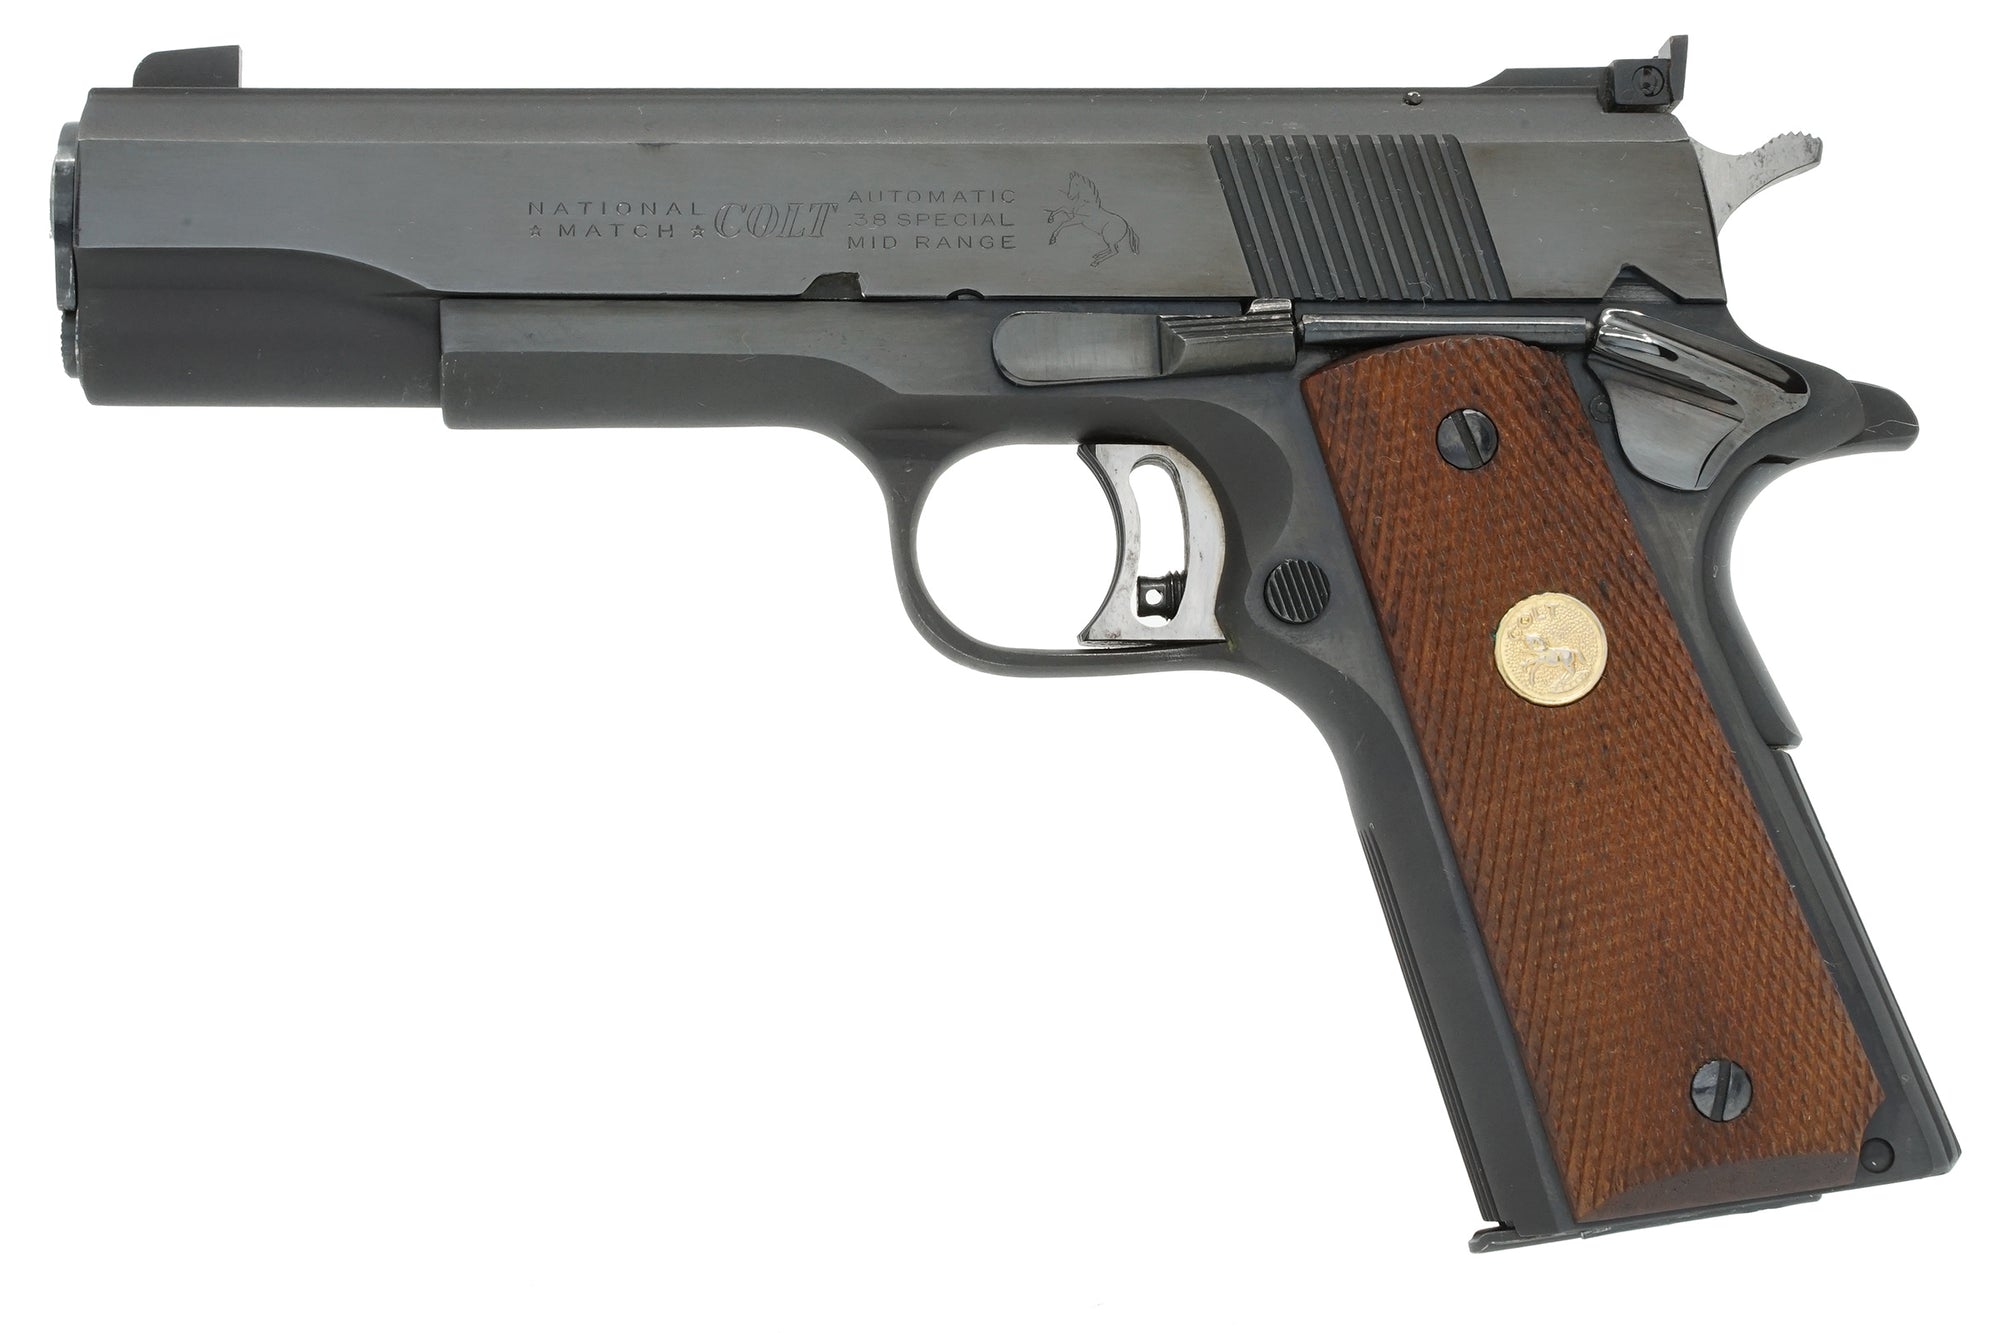 COLT GOLD CUP NATIONAL MATCH .38 SPECIAL MID-RANGE SN:6047-MR MFG:1970